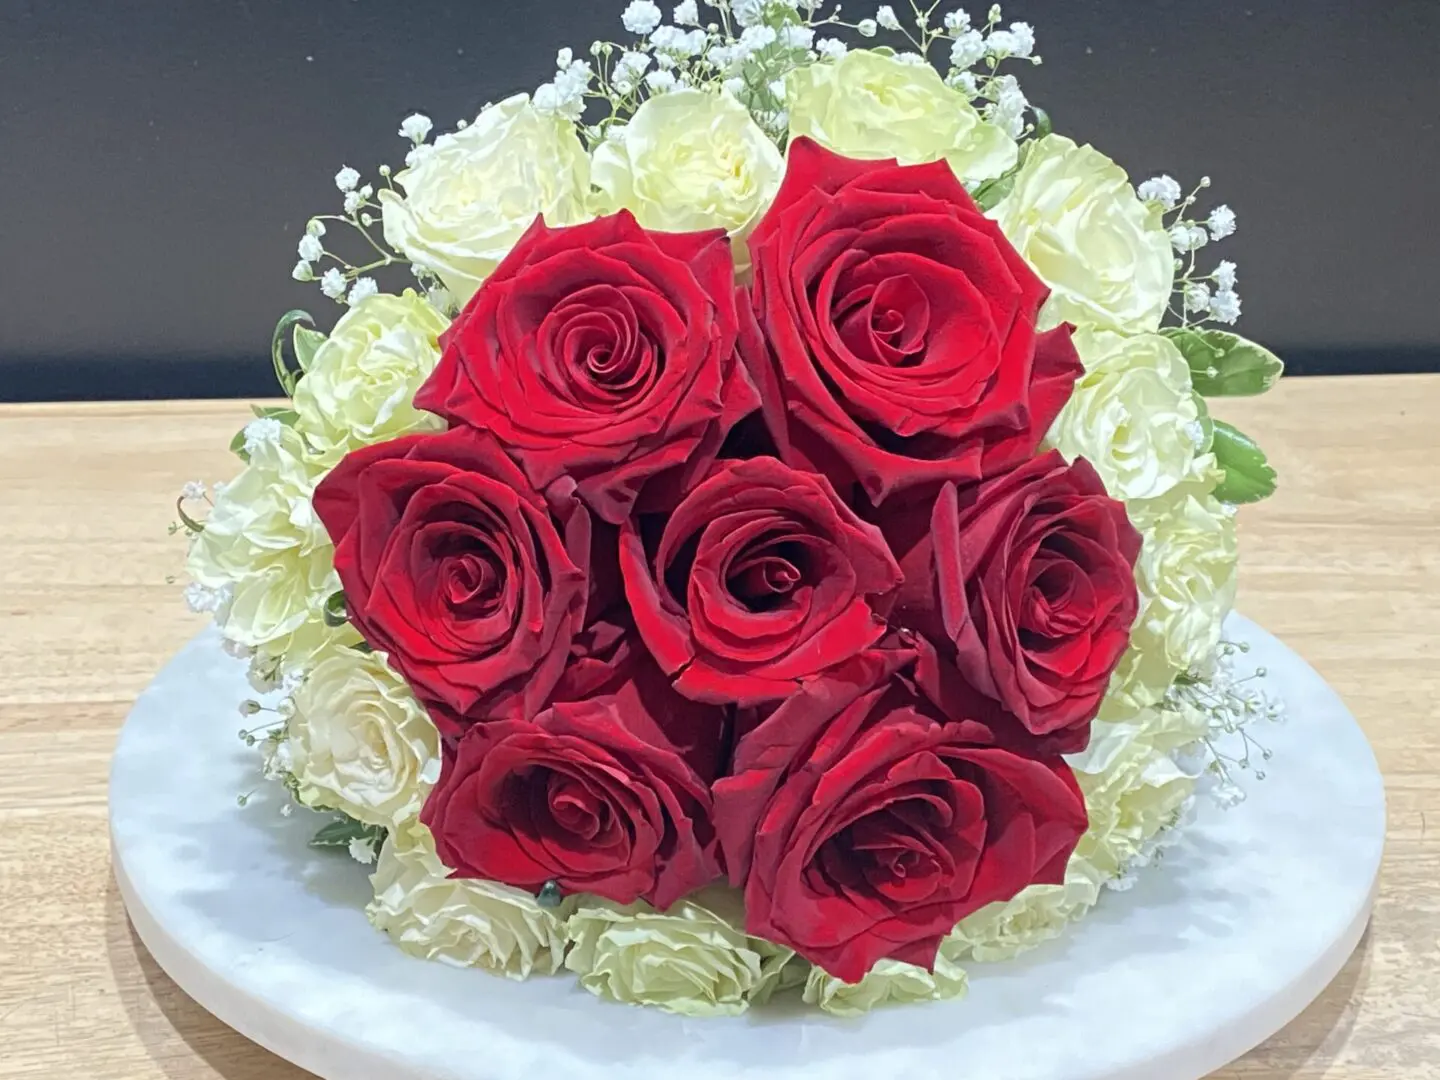 A bundle of white and red roses